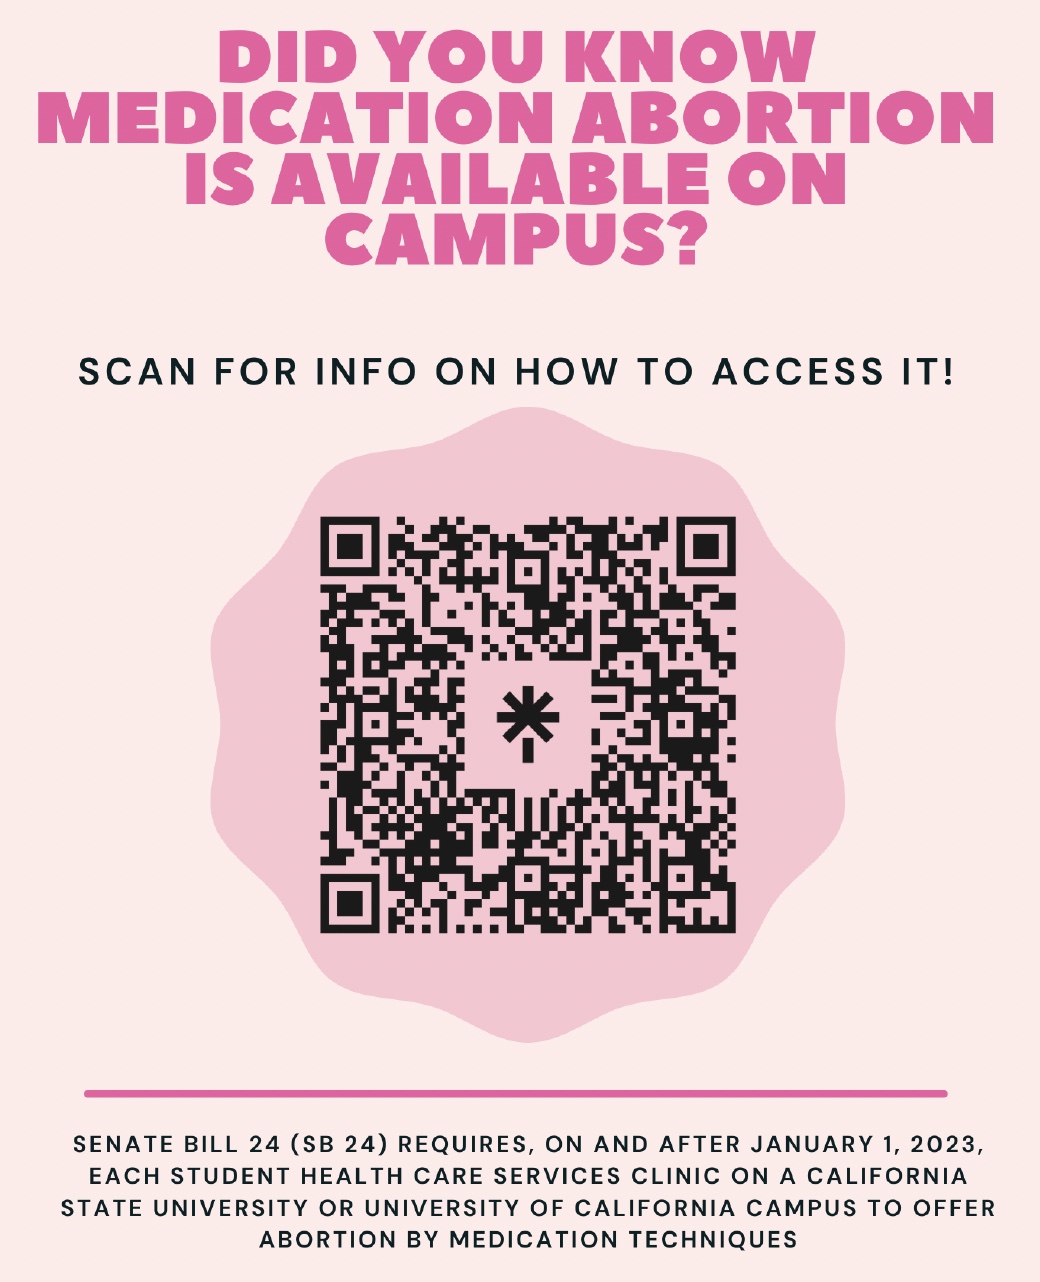 Medication Abortion Available on Campus Flyer